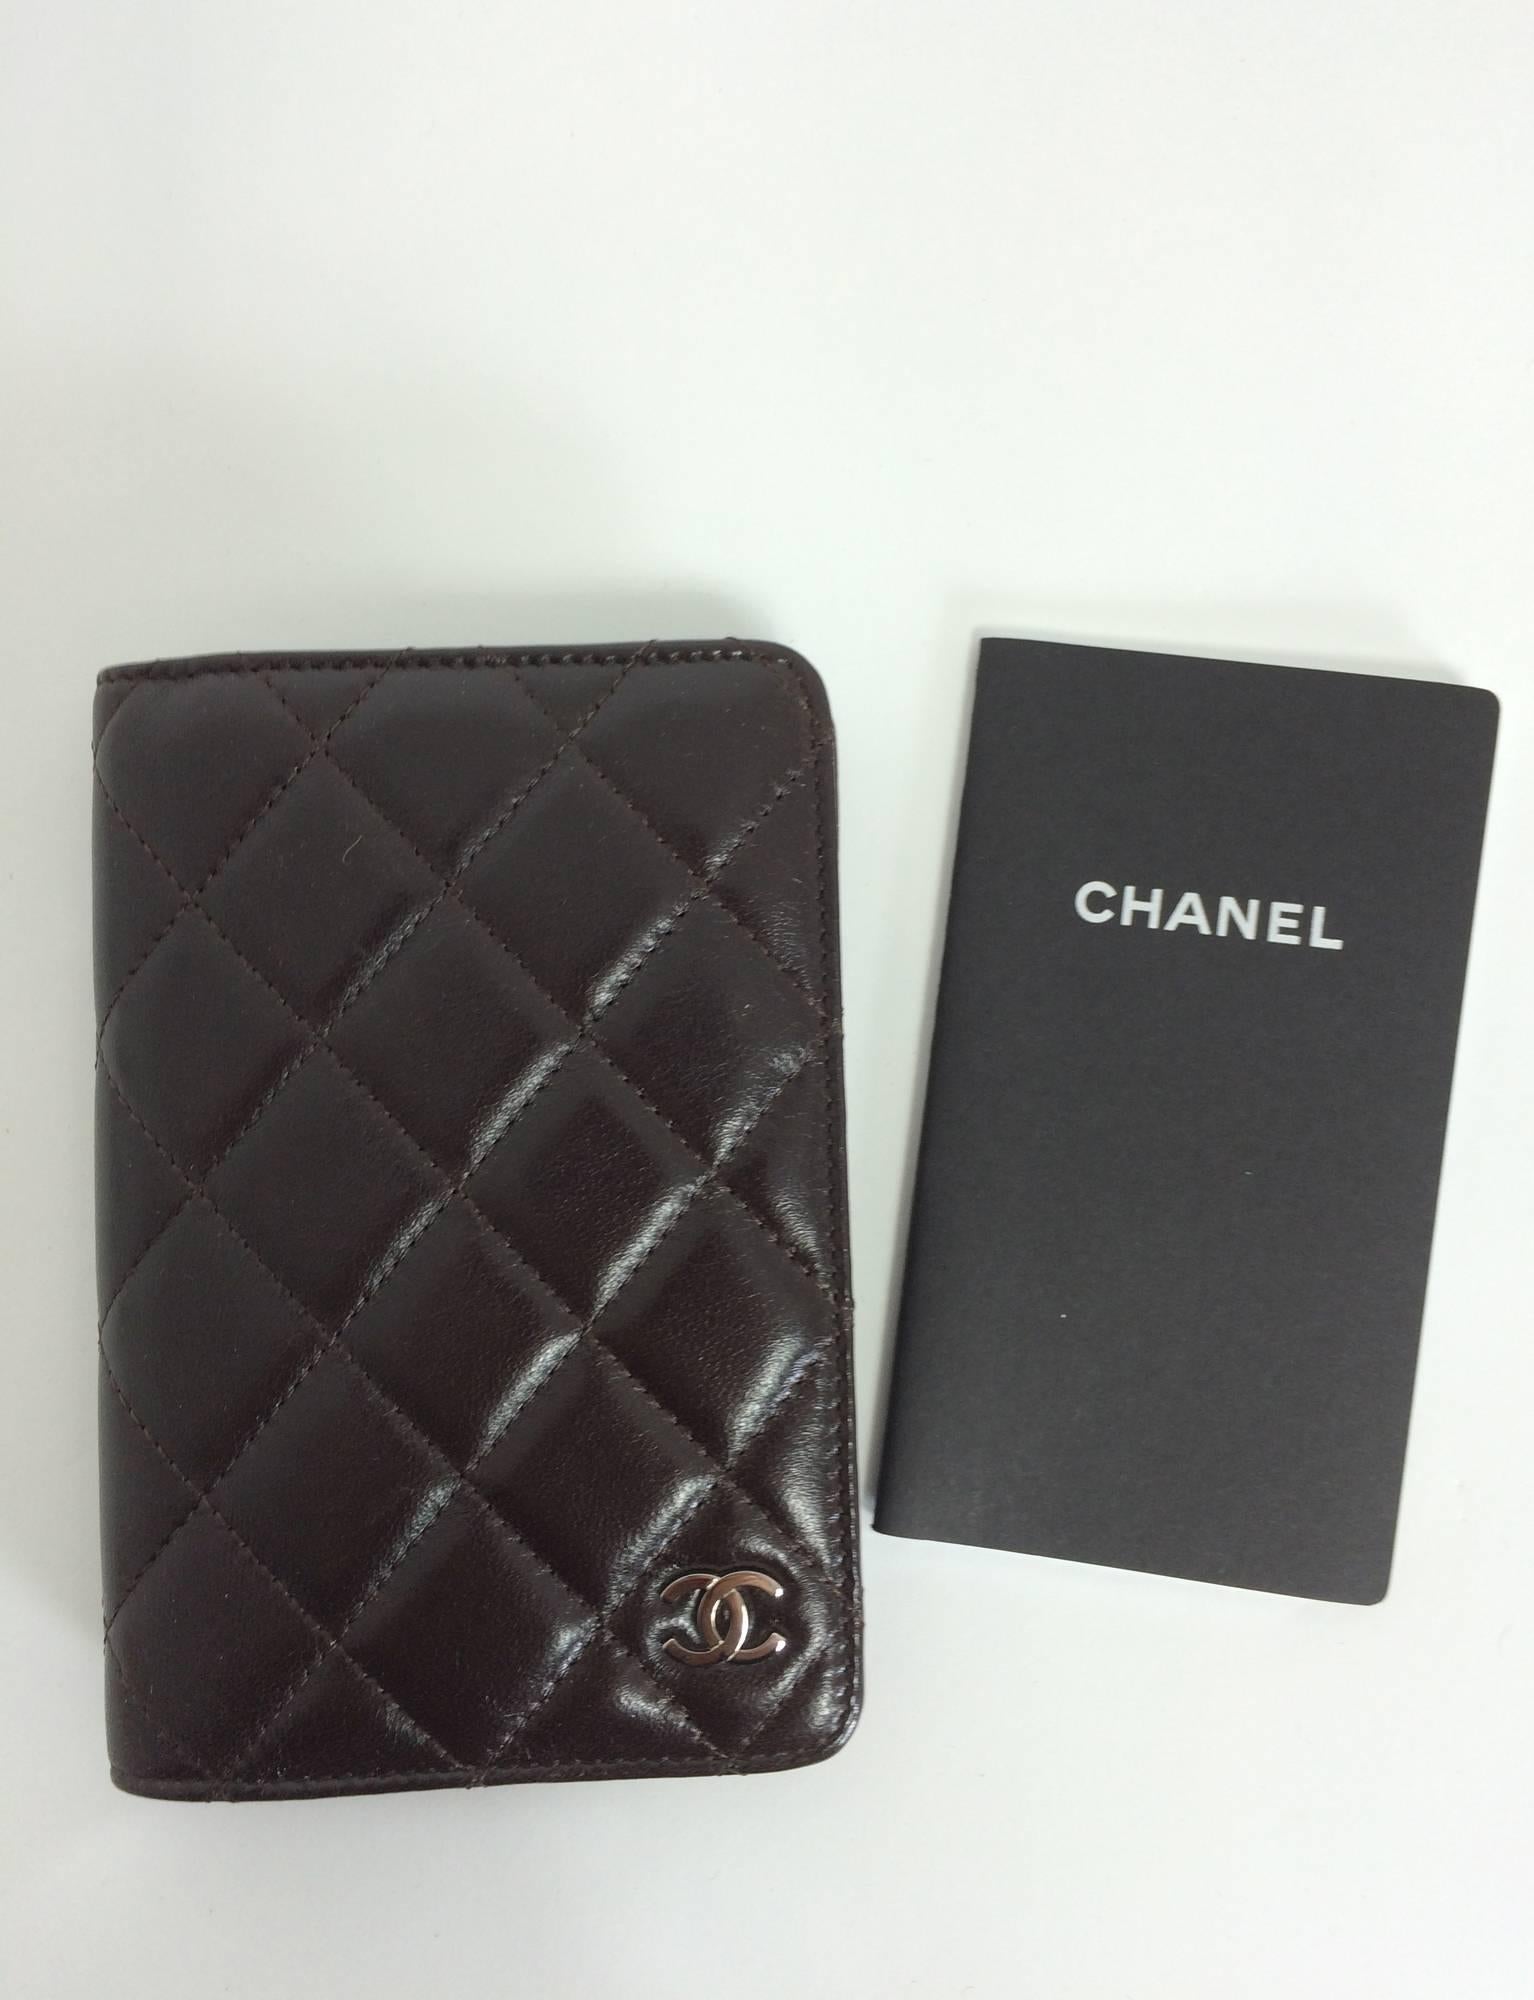 Chanel quilted leather datebook 2009 unused  3